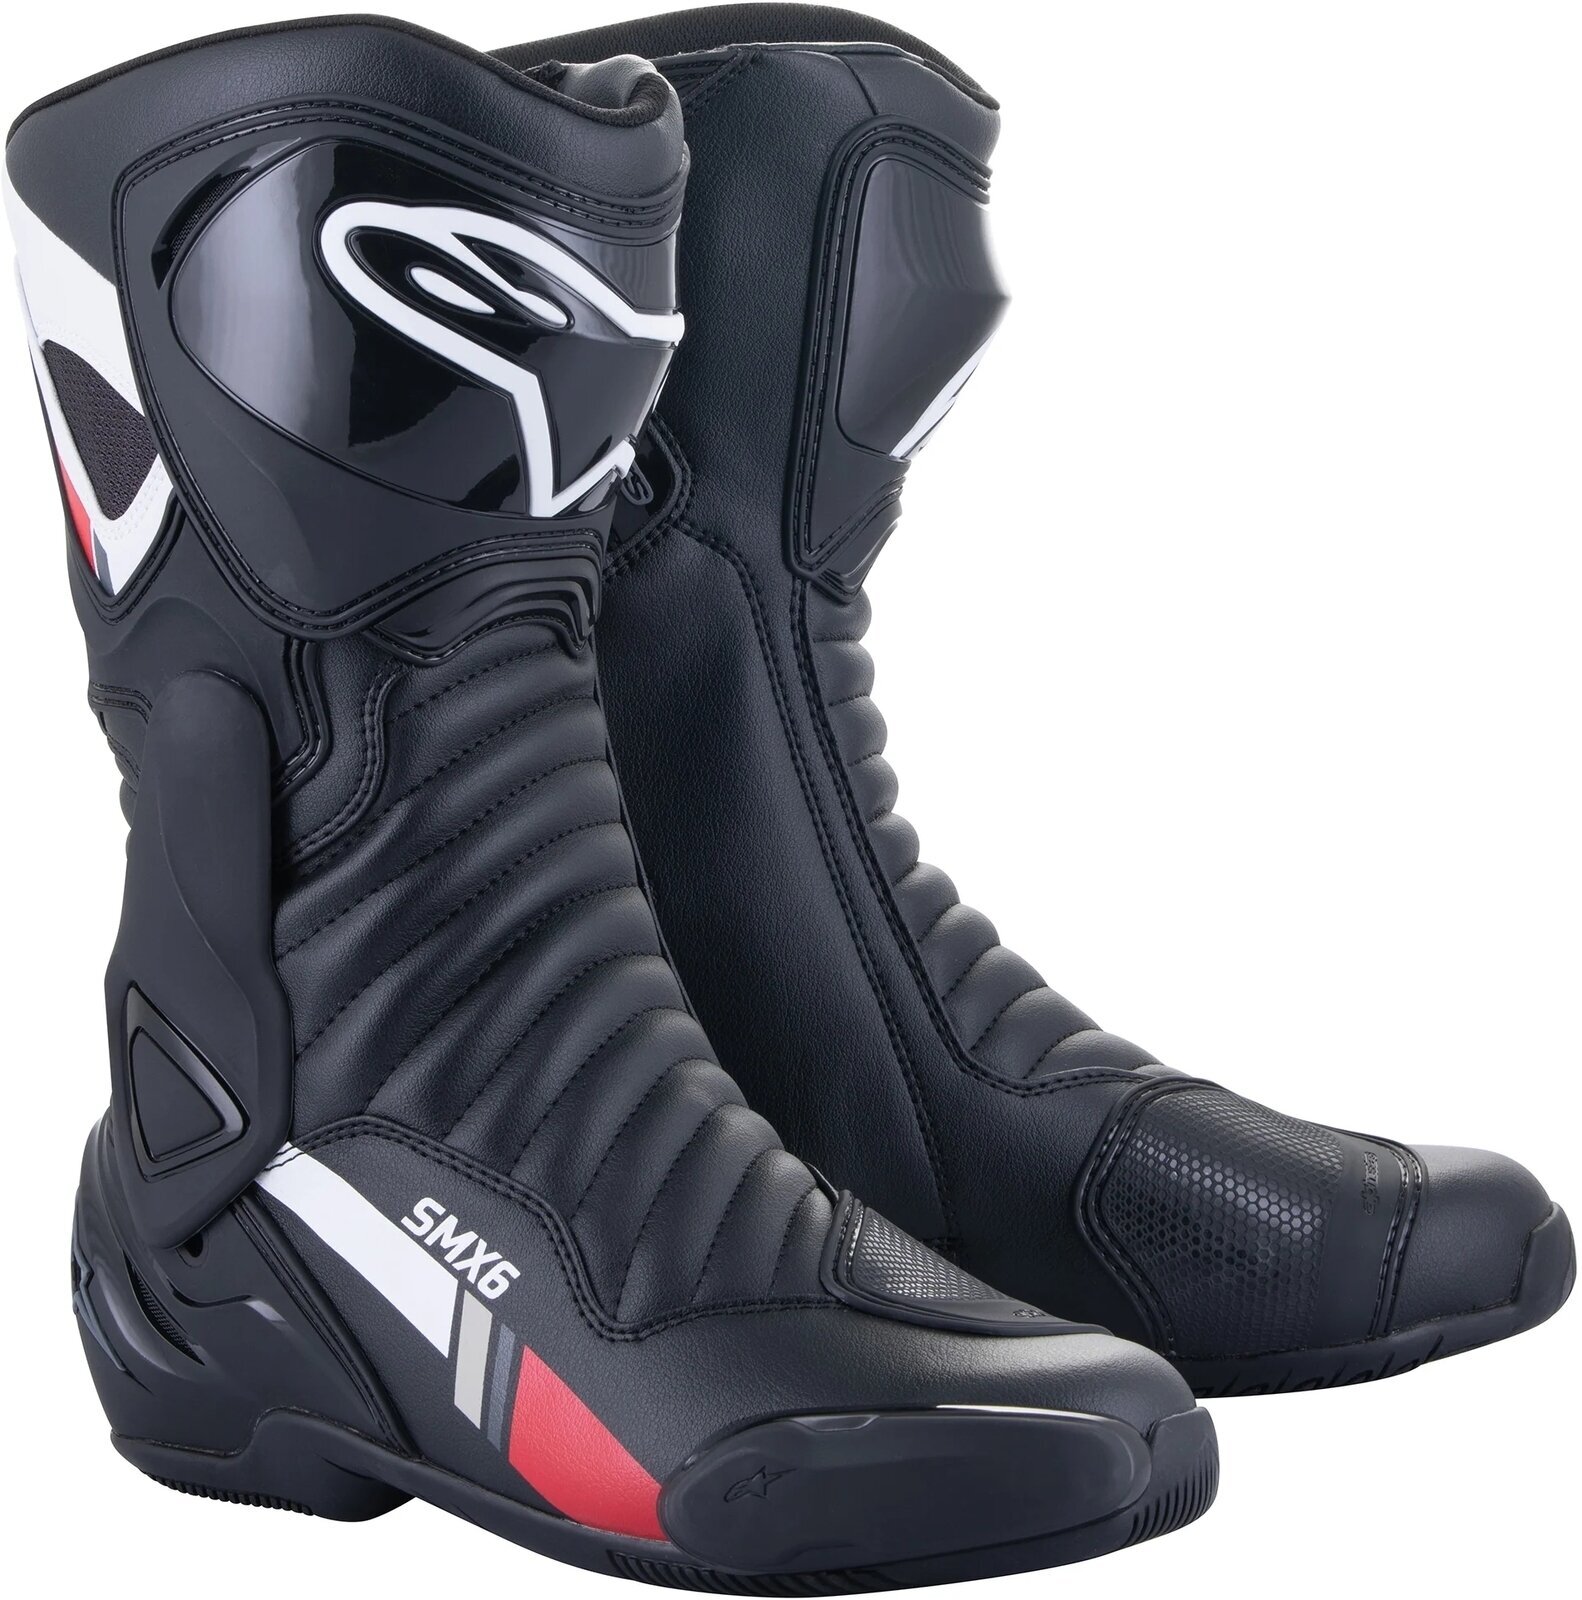 Motorcycle Boots Alpinestars SMX-6 V2 Boots Black/White/Gray 44 Motorcycle Boots